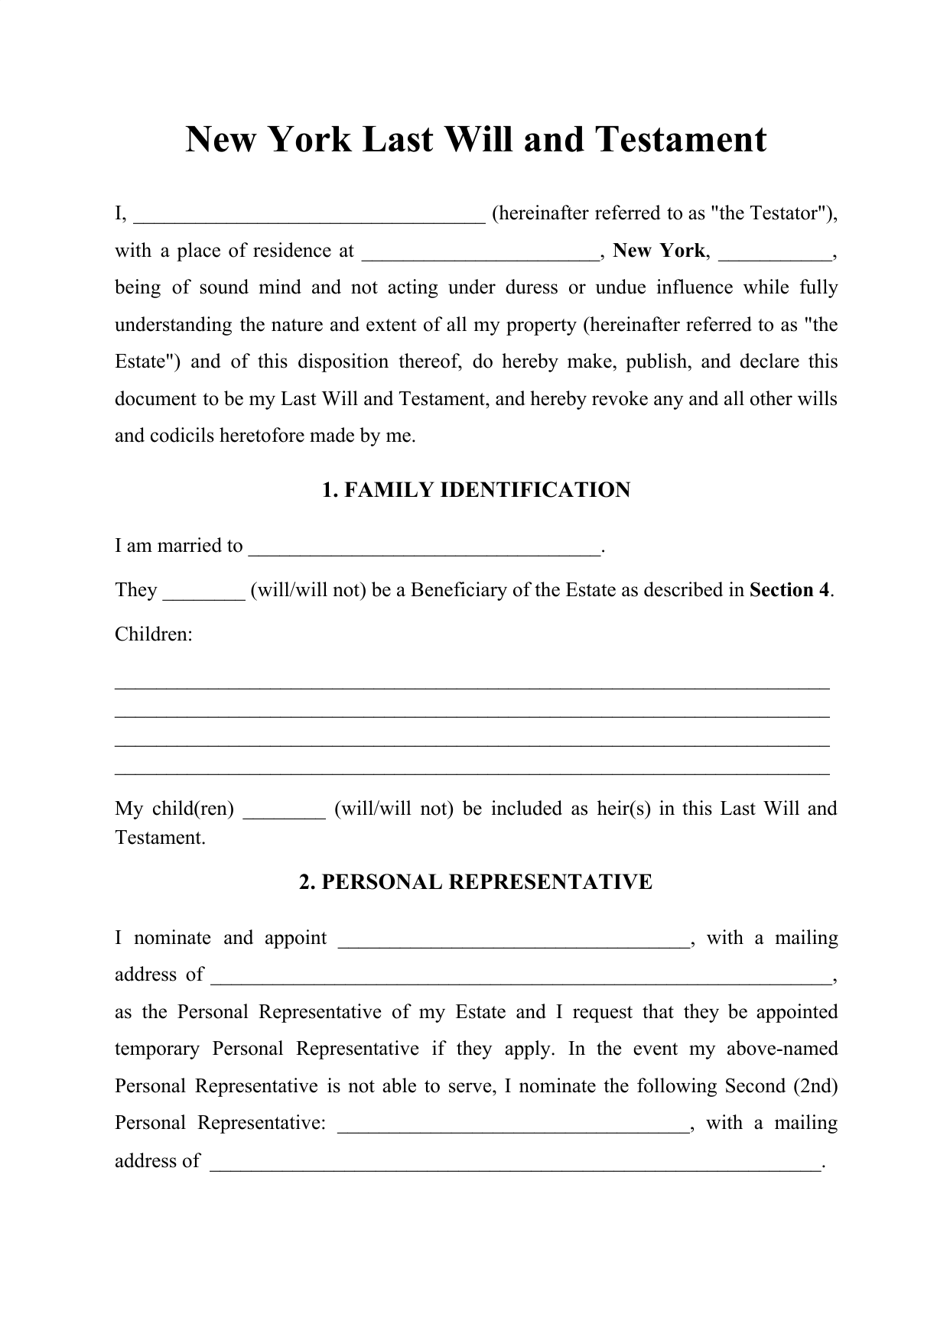 Last Will and Testament Template - New York, Page 1